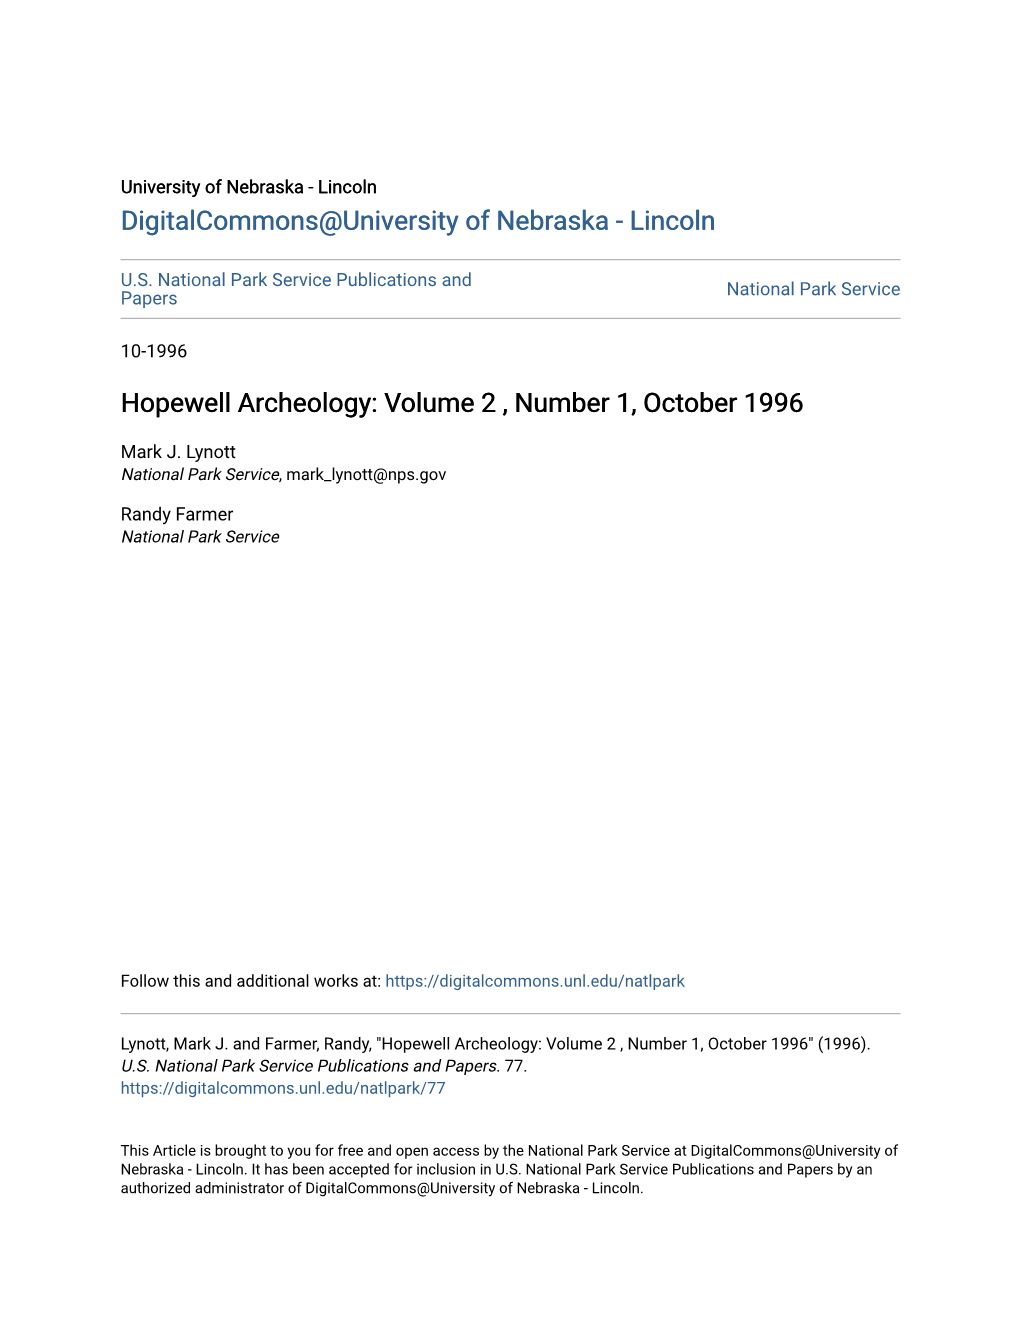 Hopewell Archeology: Volume 2 , Number 1, October 1996